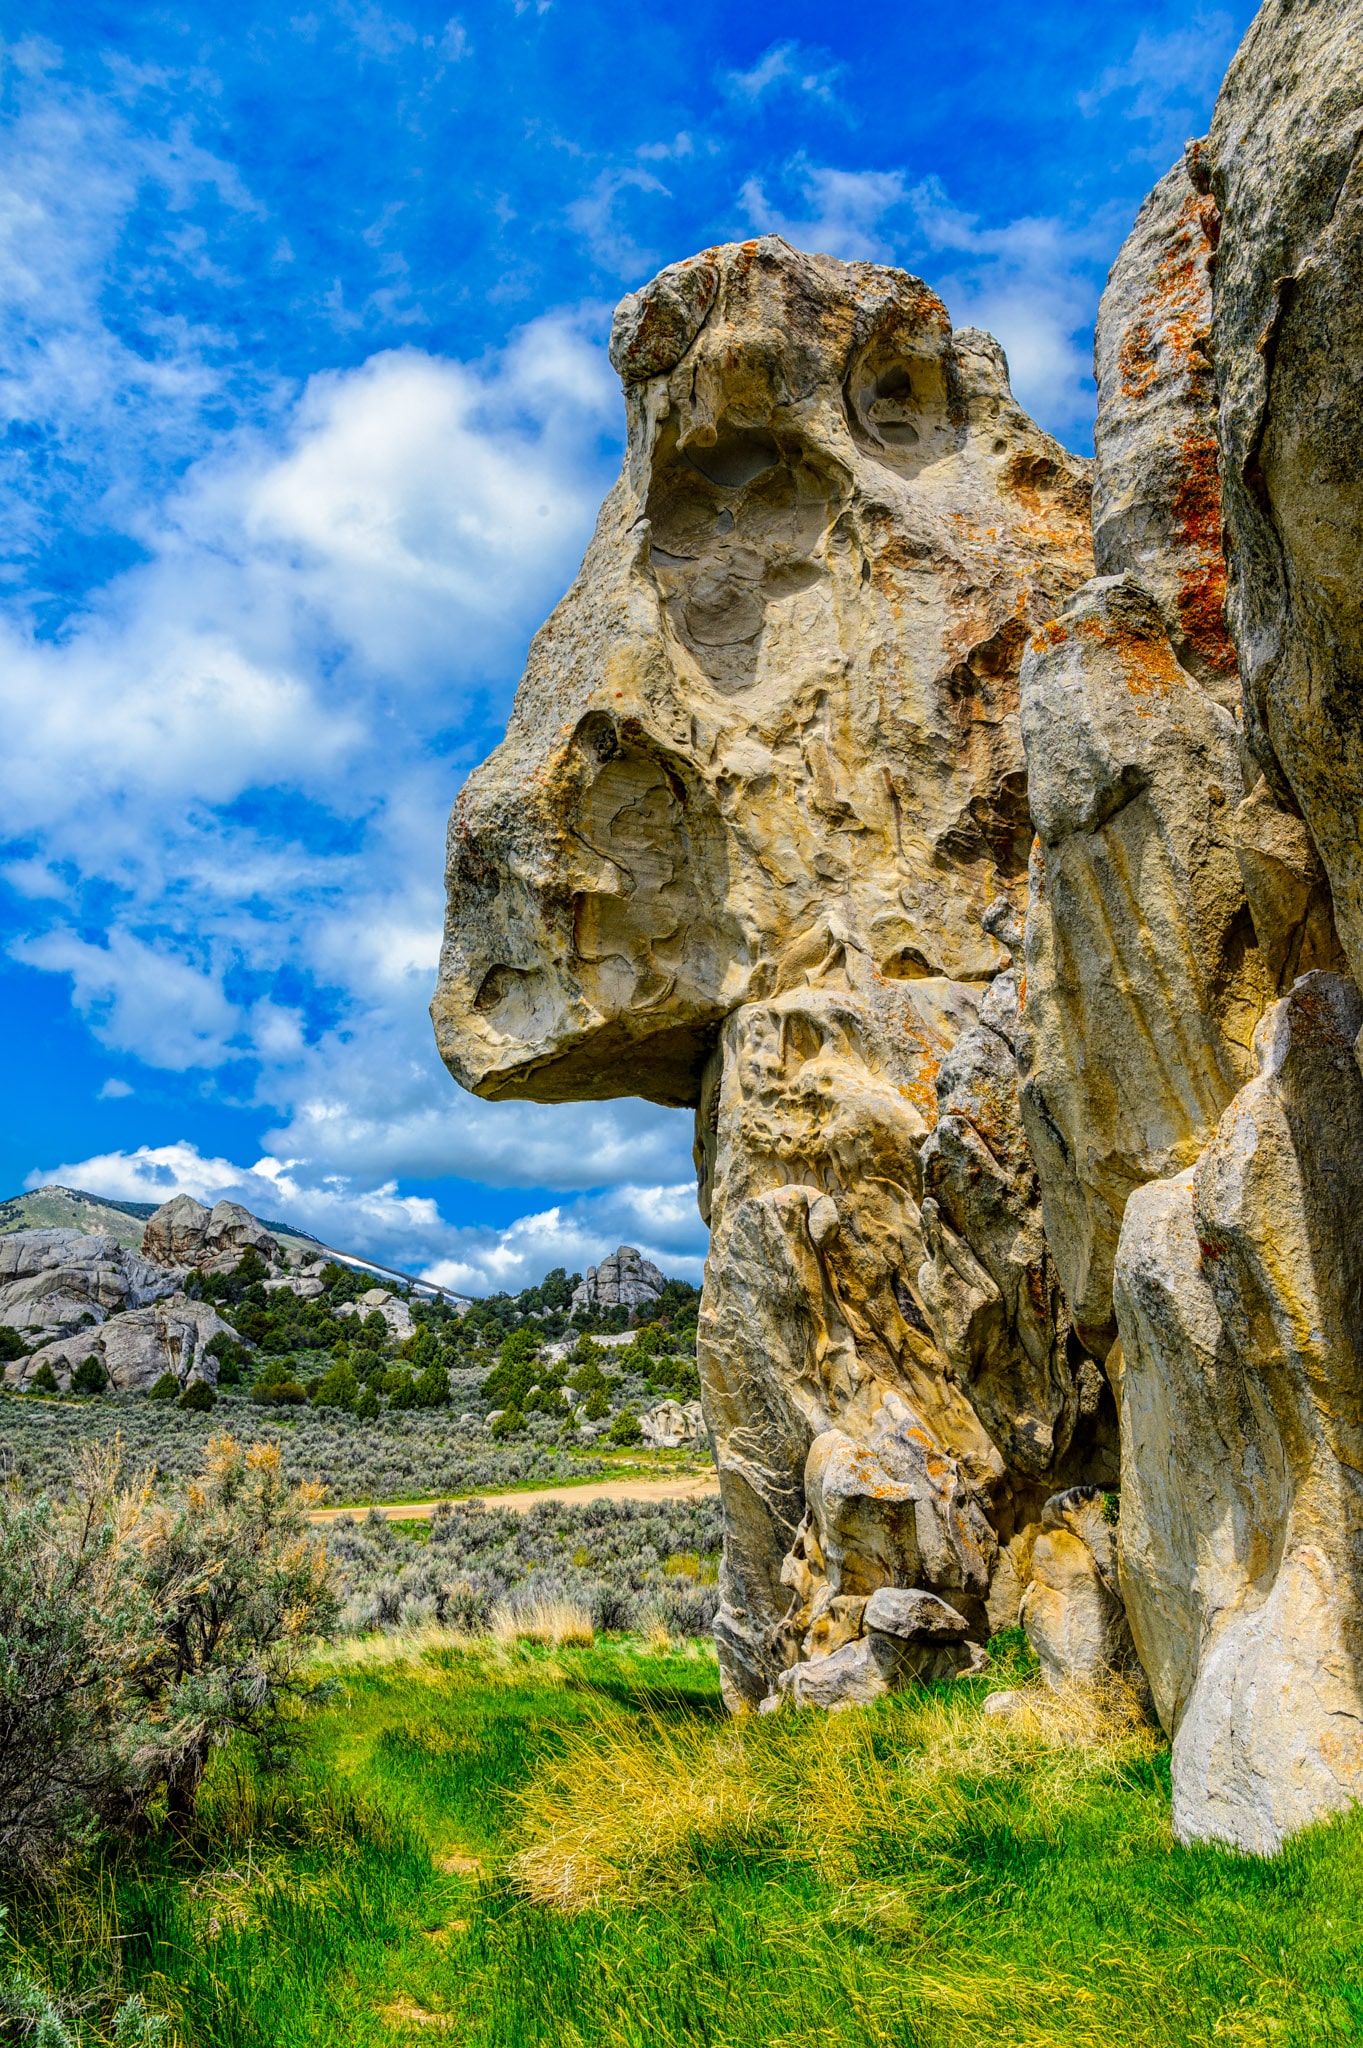 Emigrant Rock,or Camp Rock, in City of Rocks National Reserve, has the names of many emigrants who passed through in wagon trains on their way to California.